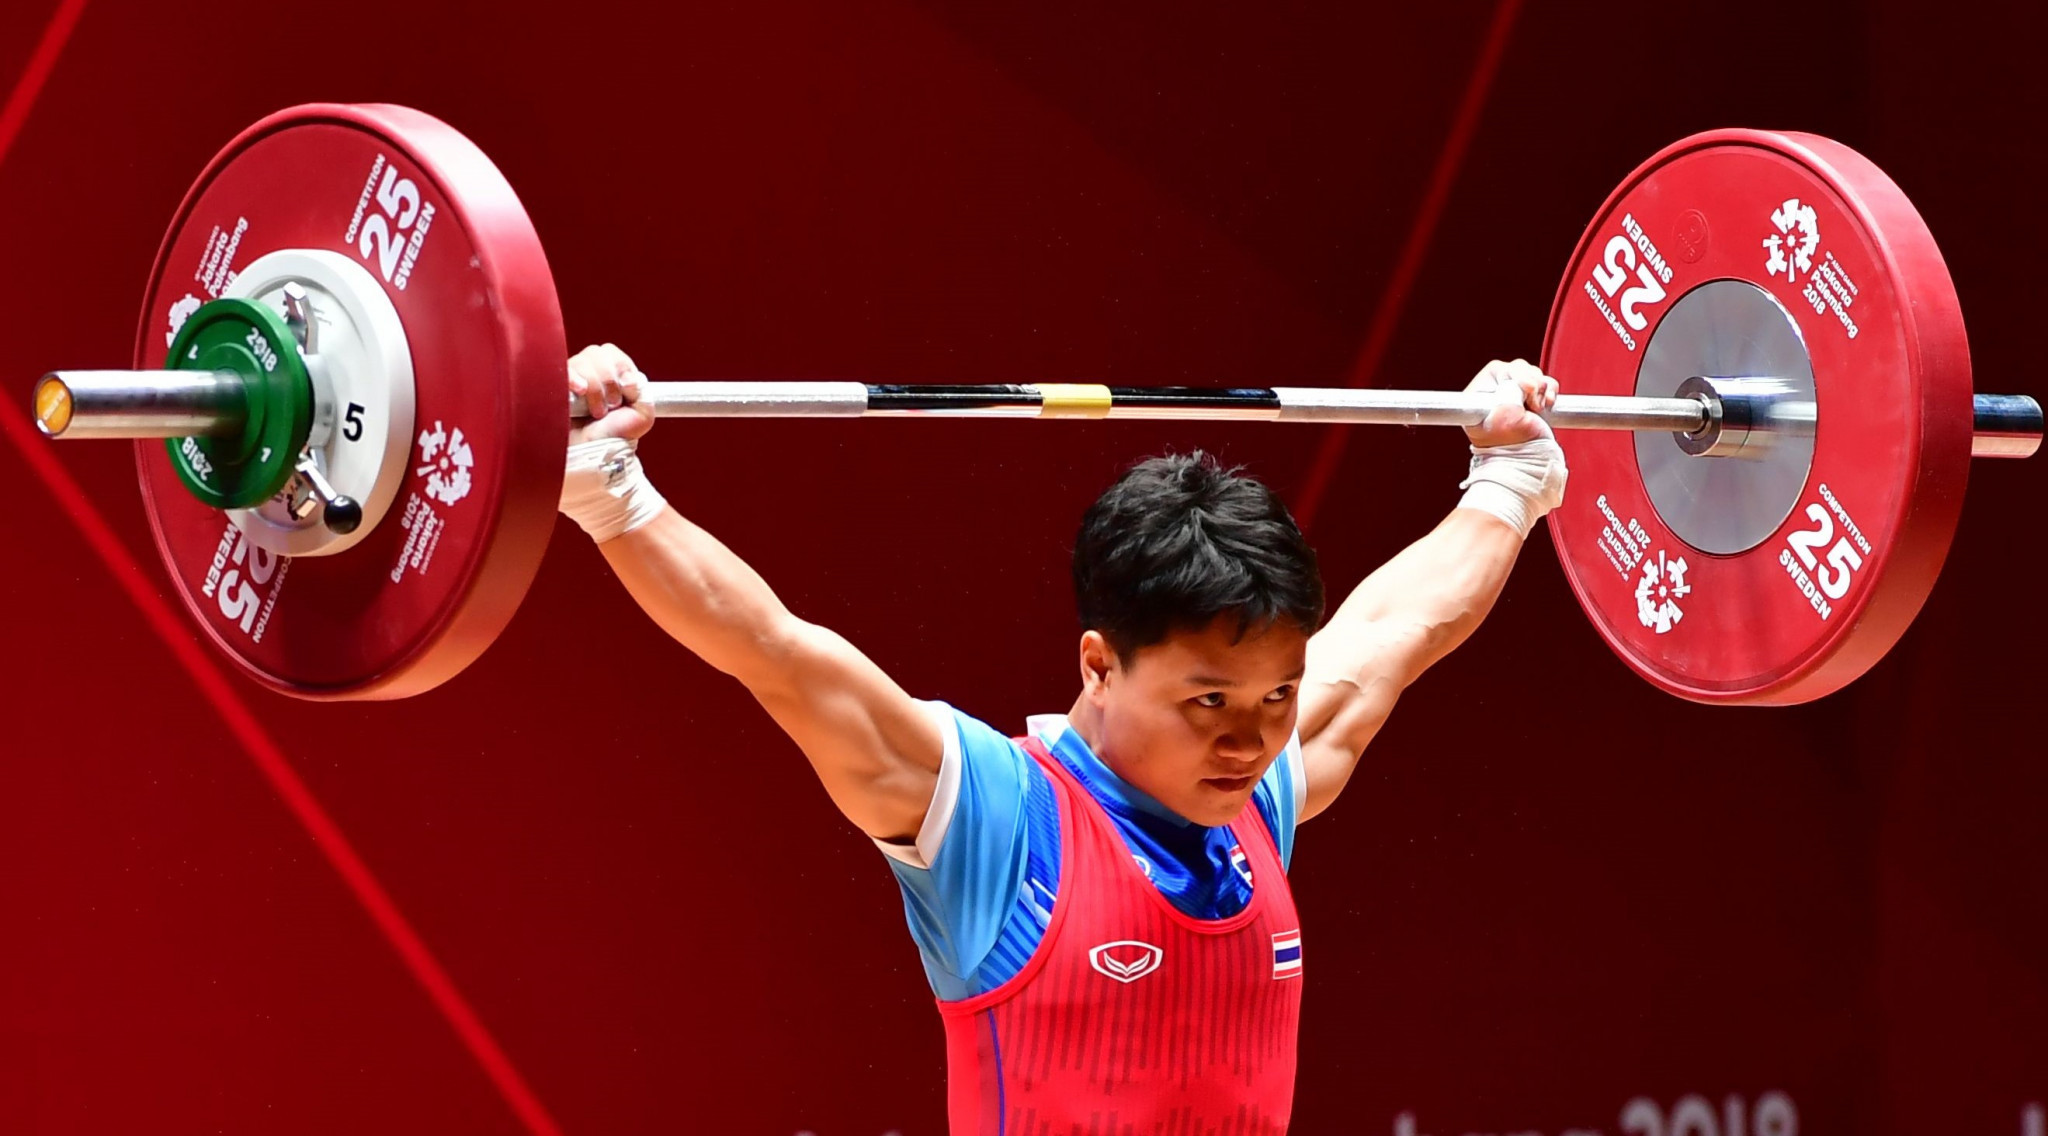 Thanyathon Sukcharoen was one of two victors from Thailand today - although they were not able to compete under the national flag ©Getty Images